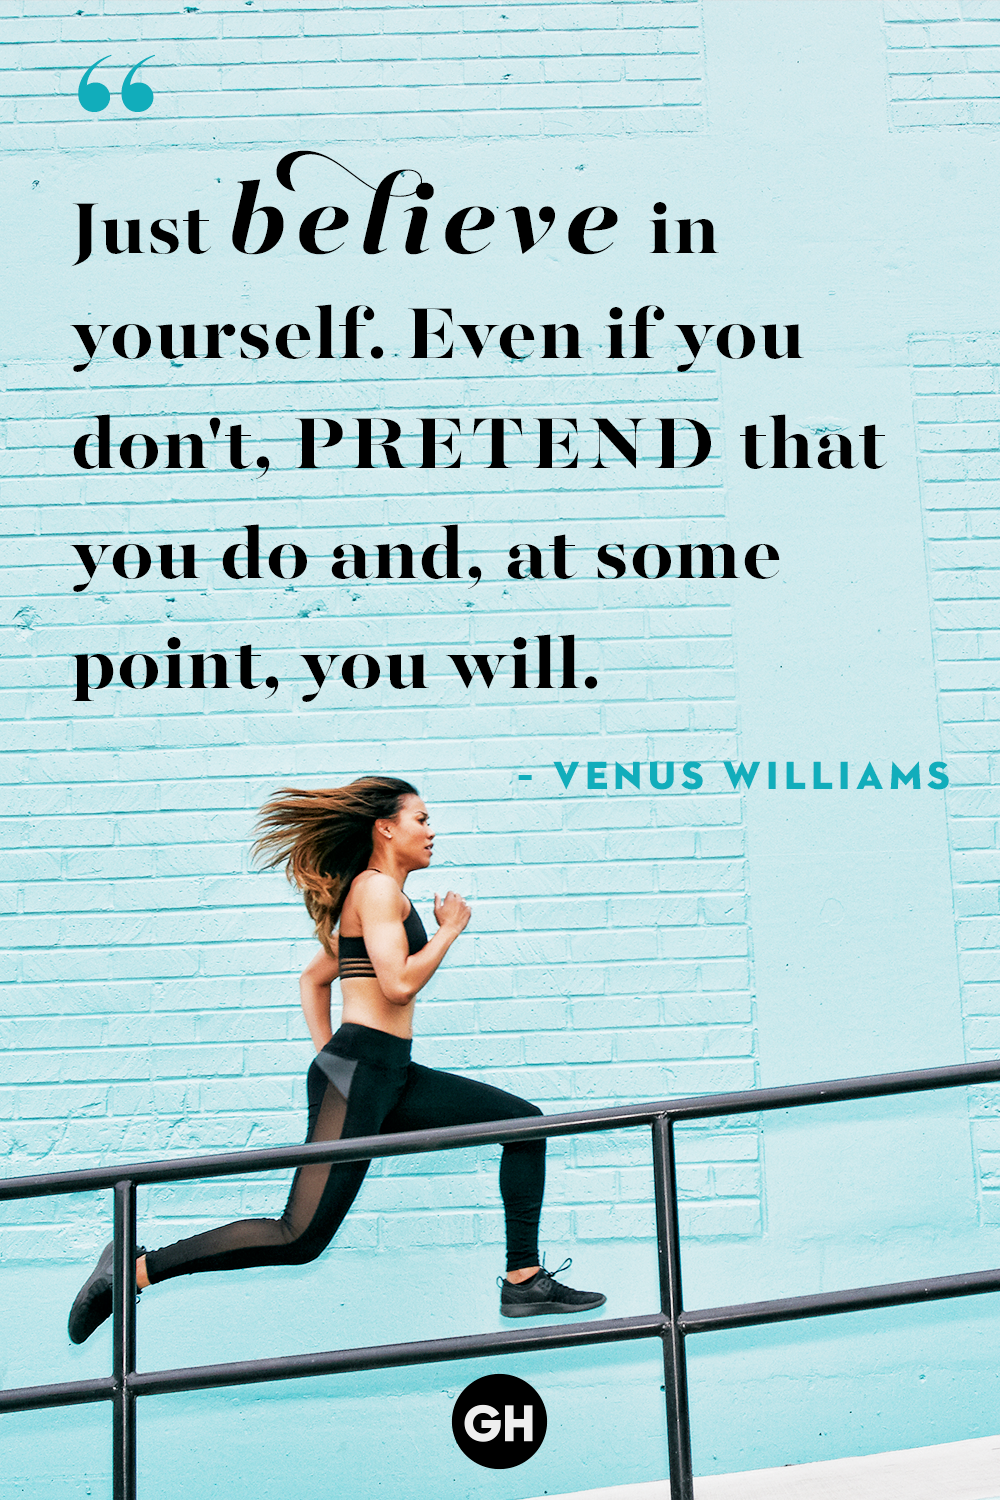 motivational quotes for working out and losing weight